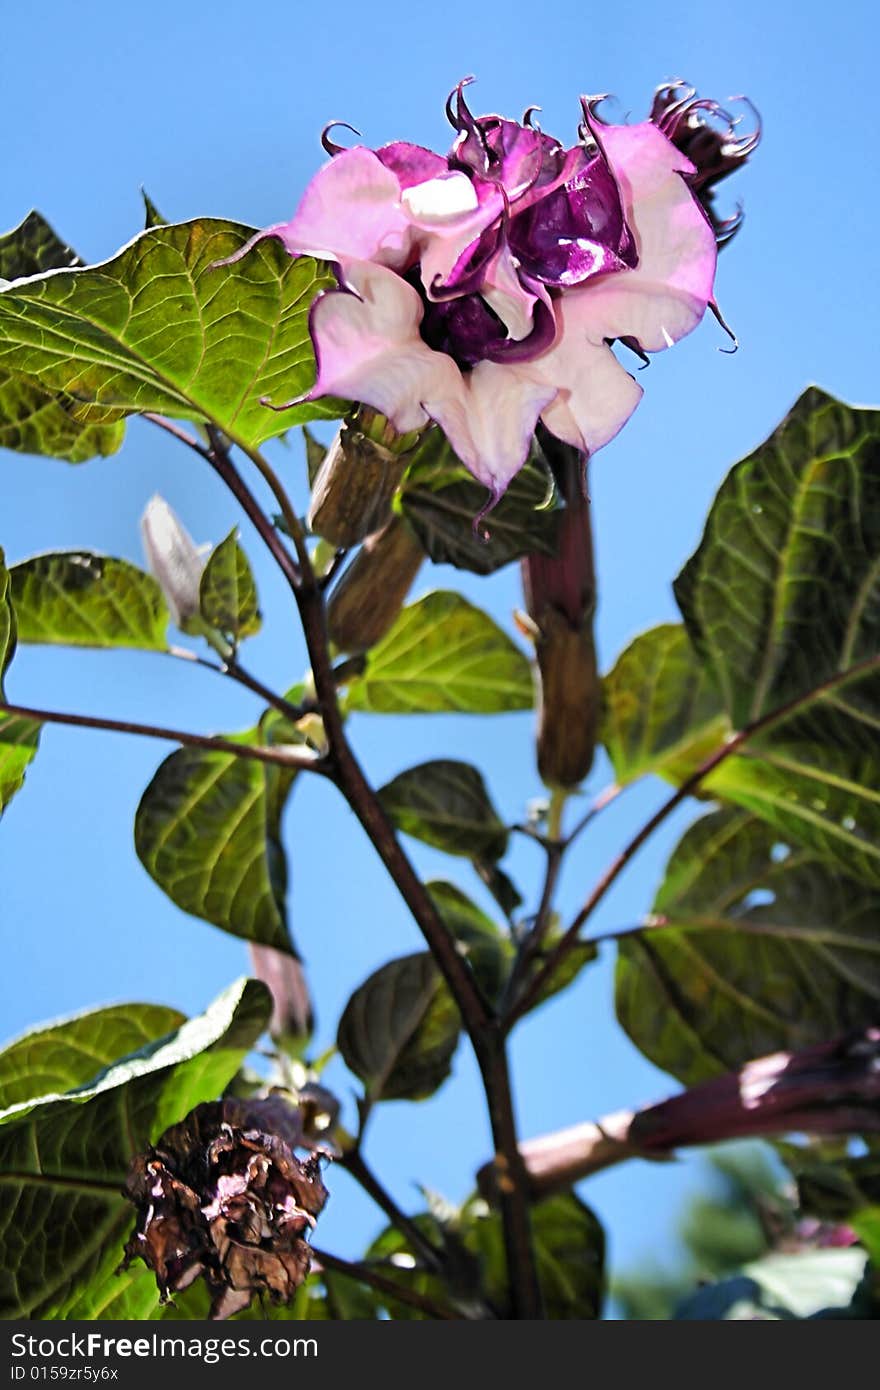 A white and purple angel's trumpet flower, aka a downy thorn apple Datura cornucopia, on a plant with large leaves in front of a clear blue sky